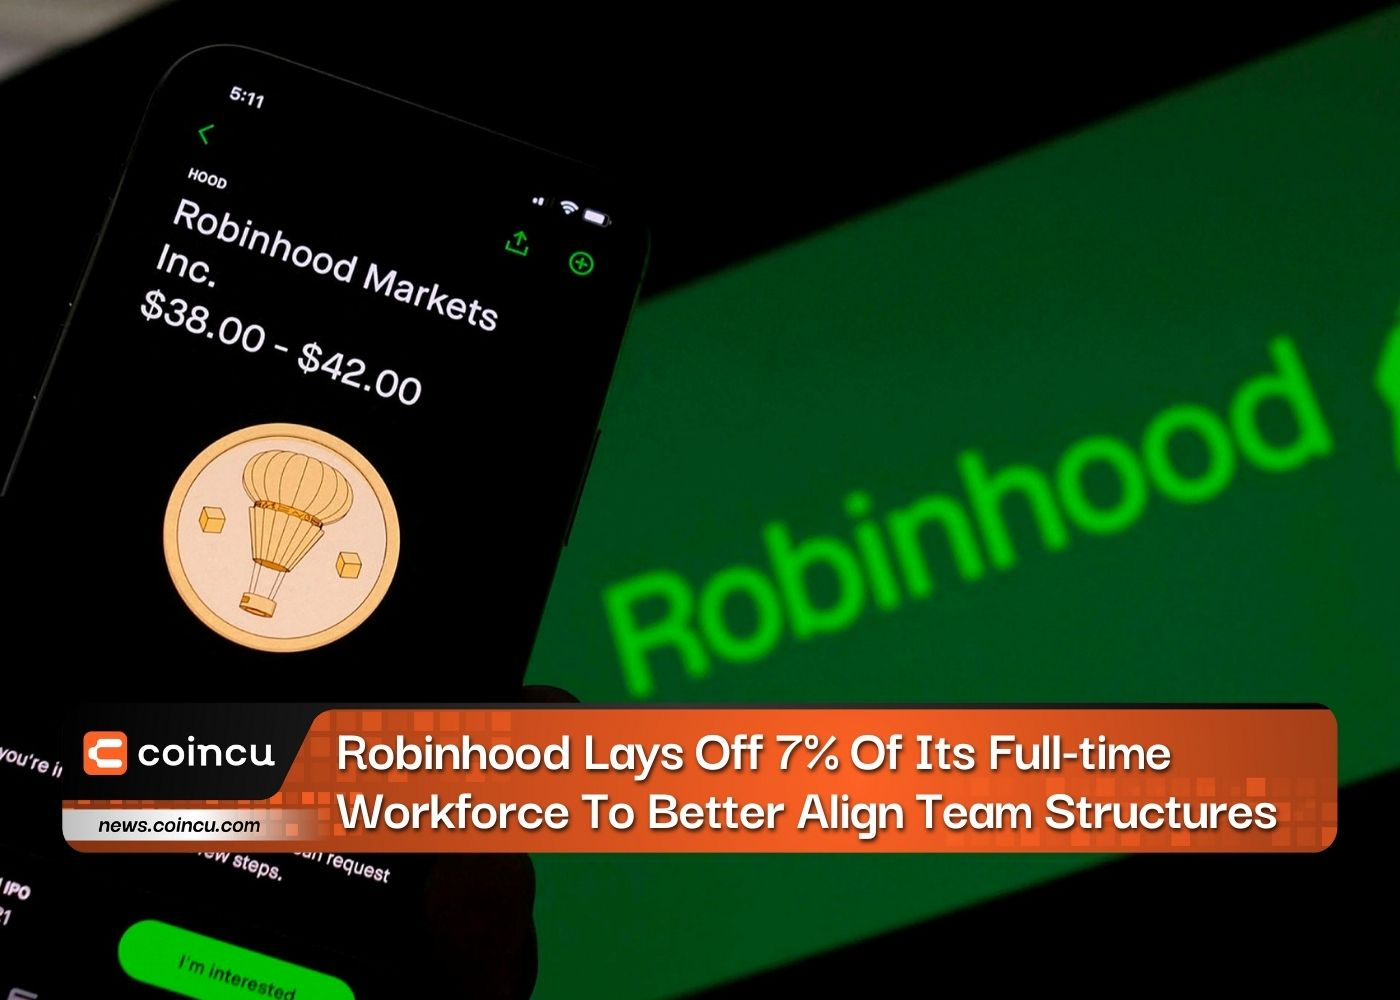 Robinhood Lays Off 7% Of Its Full-time Workforce To Better Align Team Structures